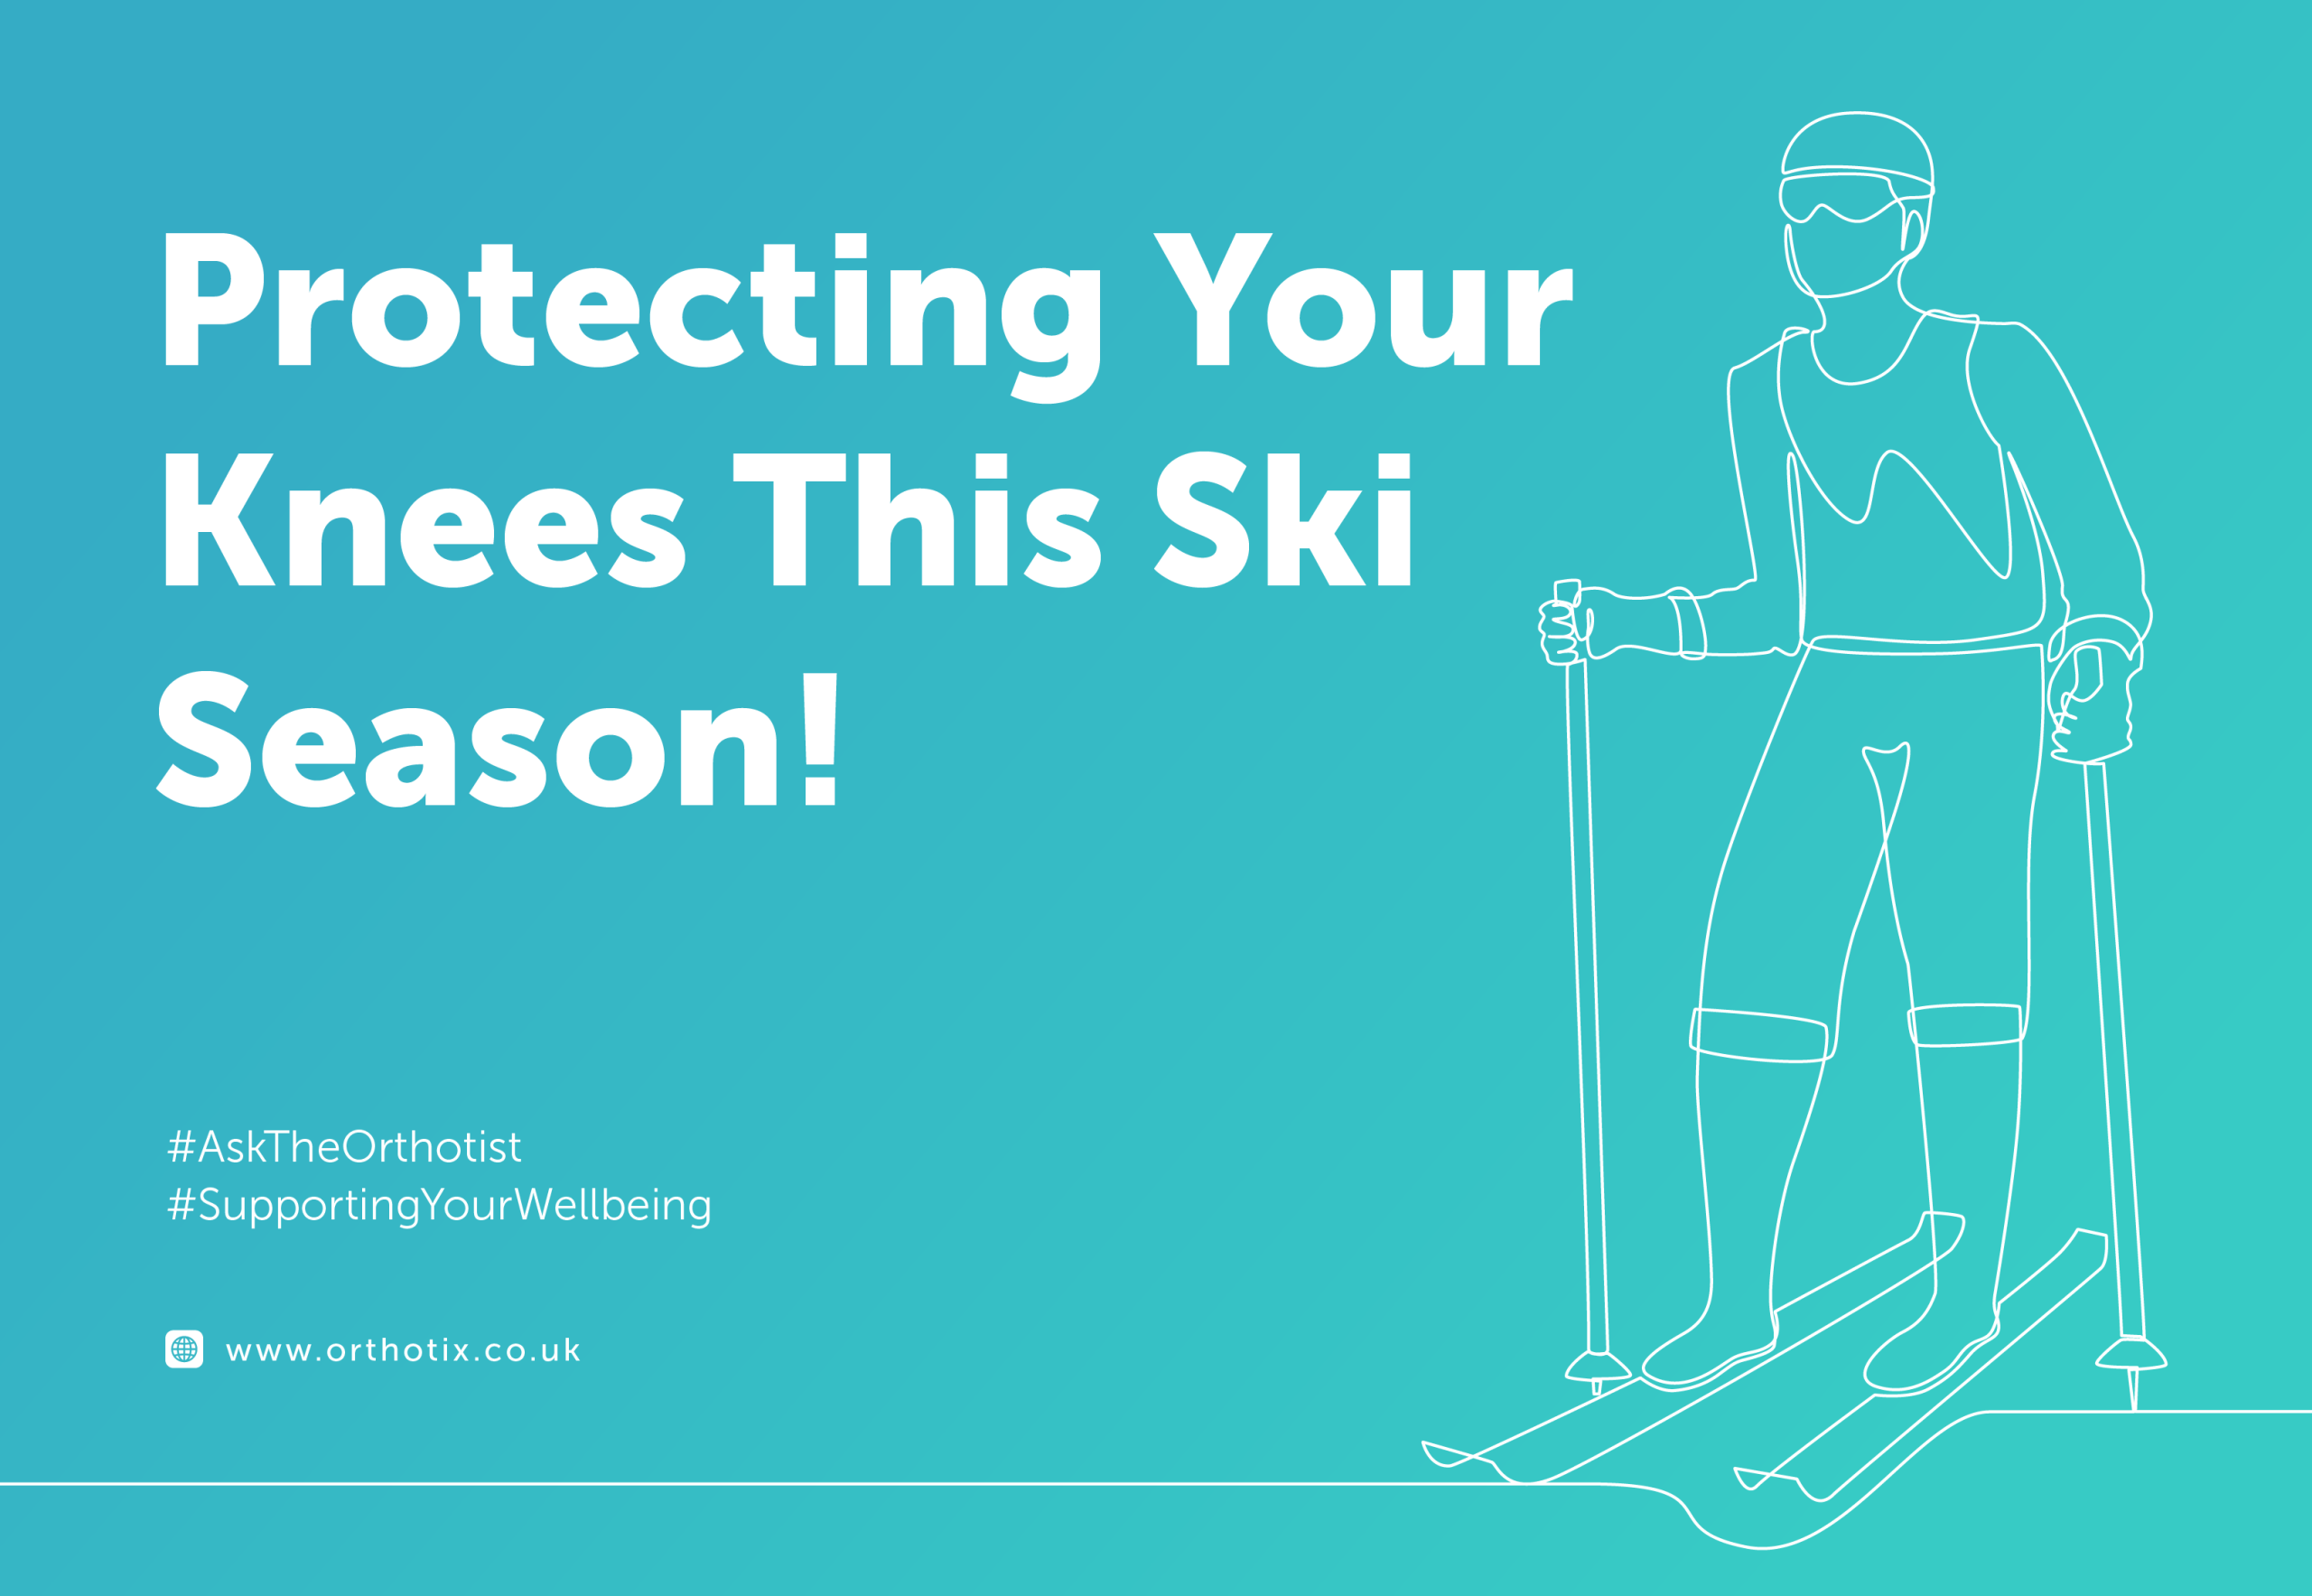 Protecting your knees this ski season - blog about how to avoid injury when skiing and what knee braces are best